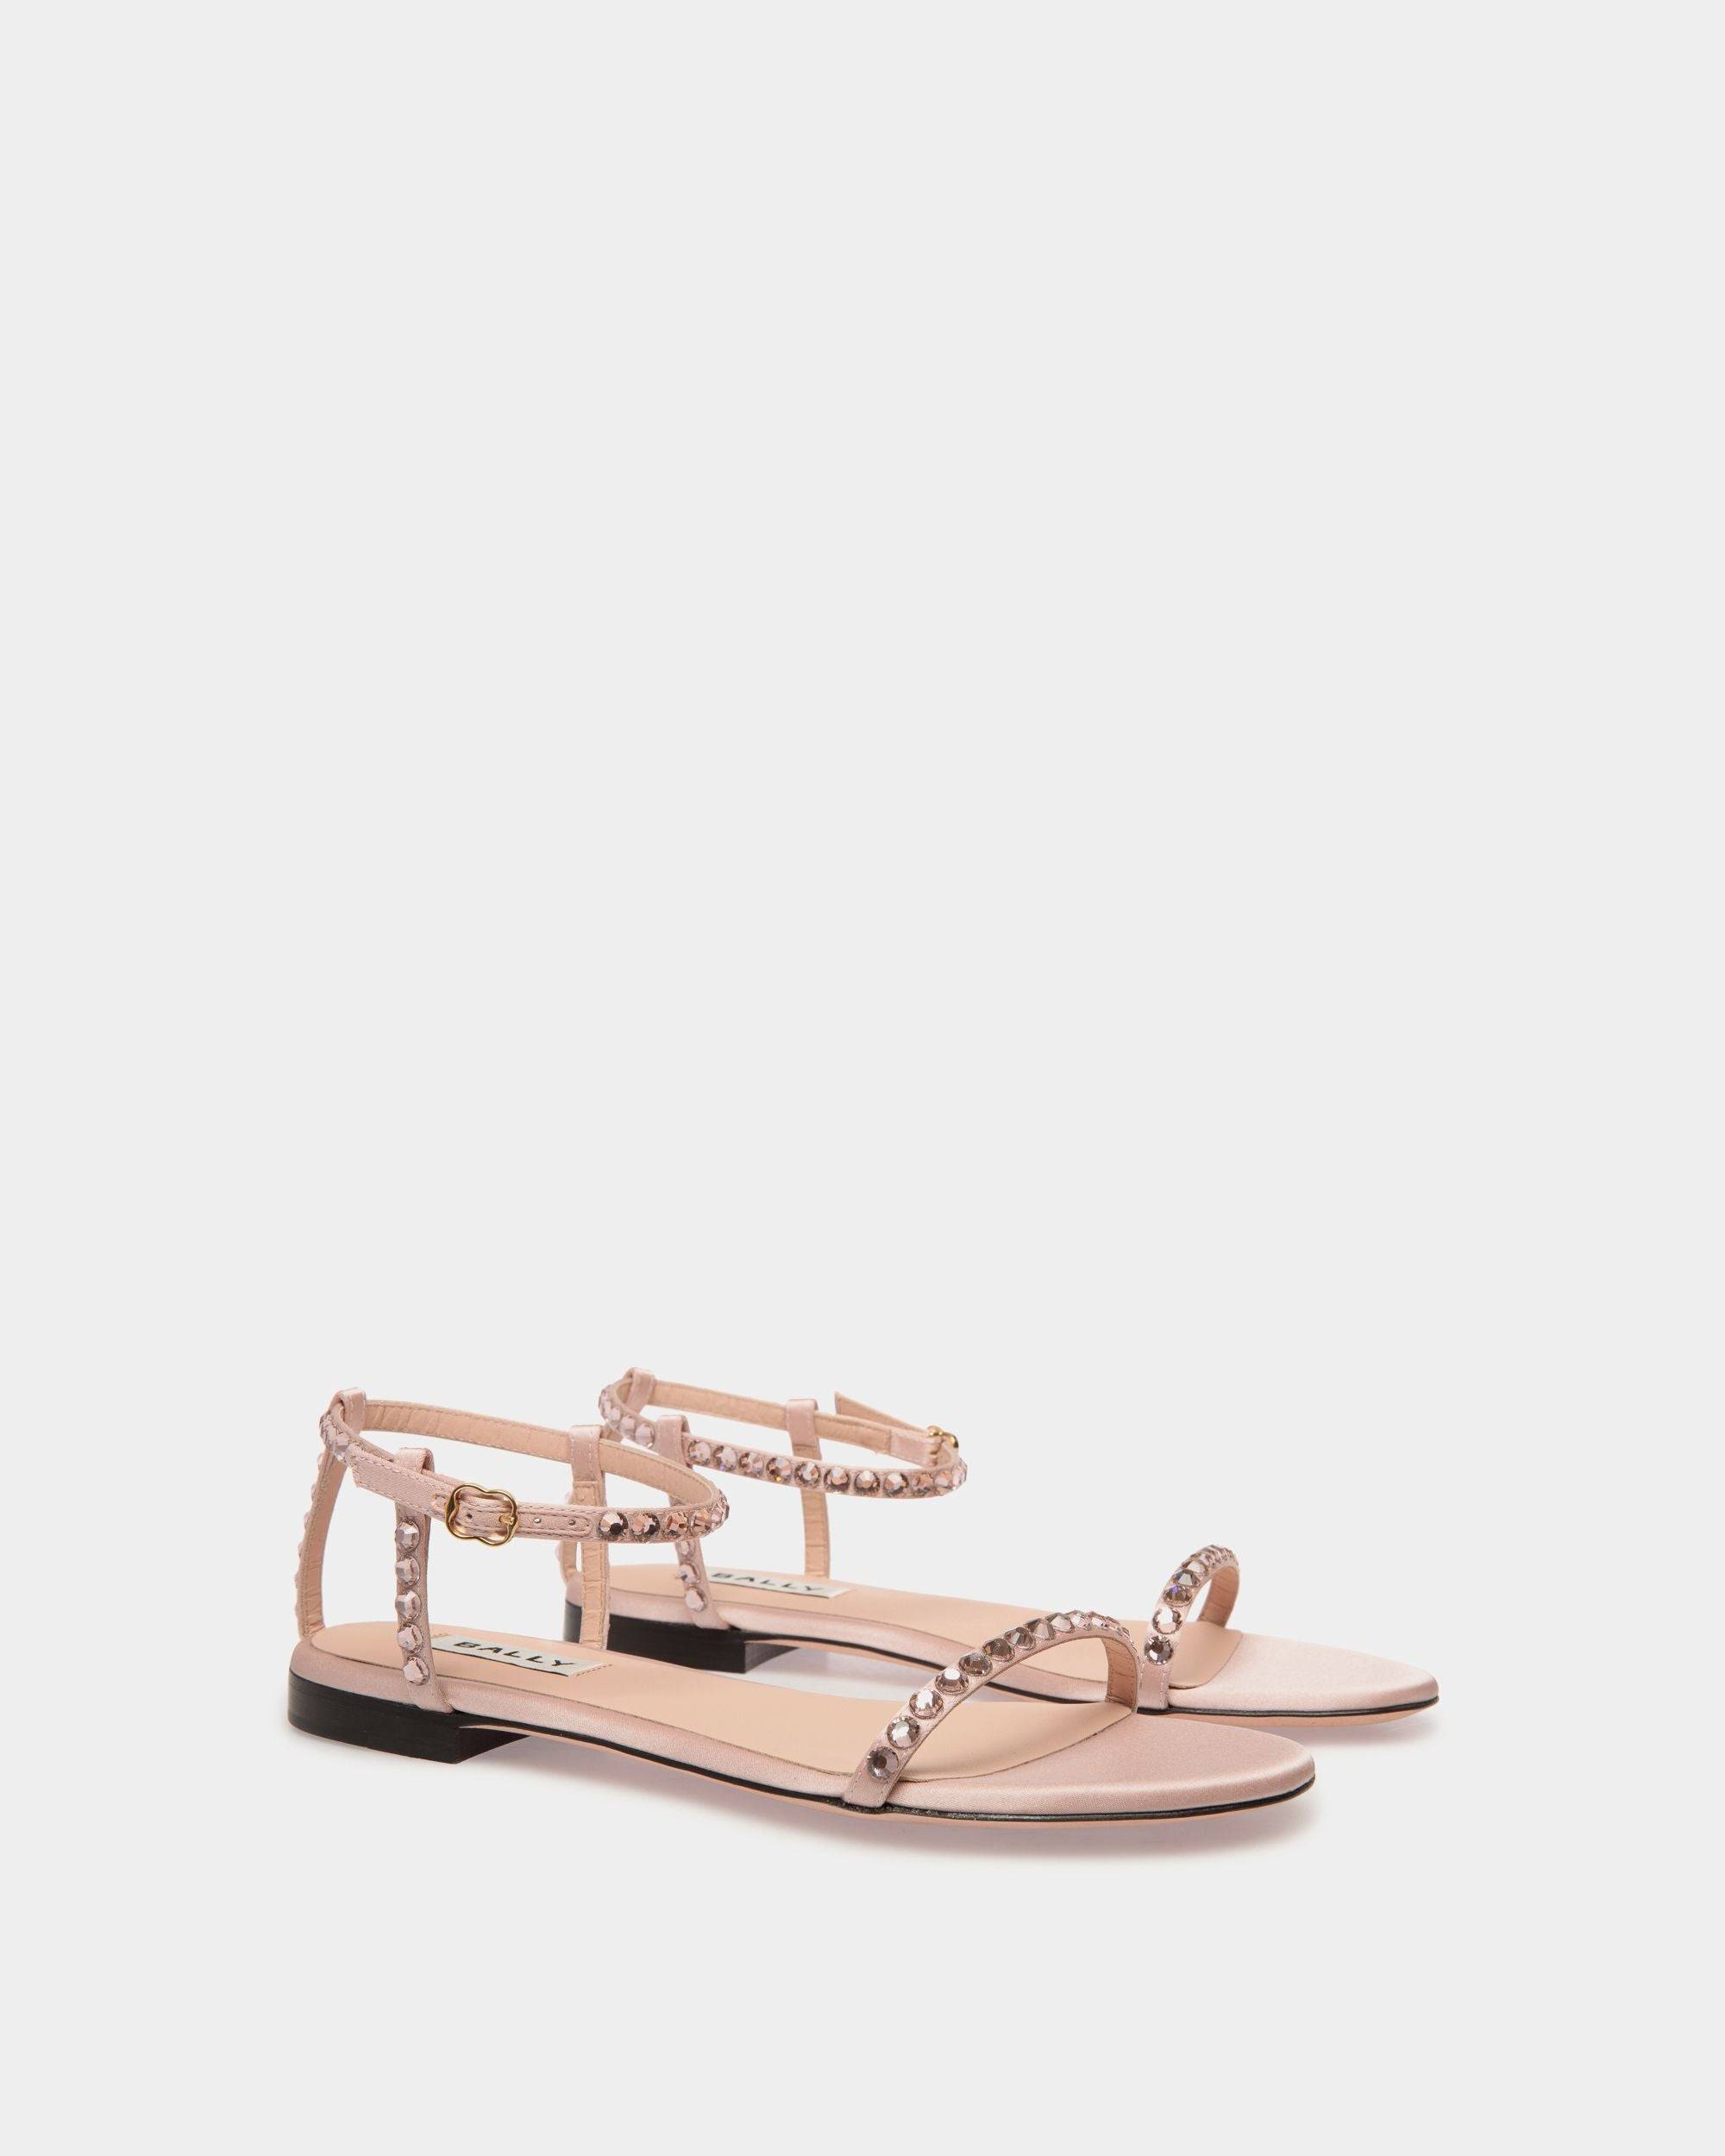 Katy Flat Sandal in Light Pink Fabric with Crystals - Women's - Bally - 02